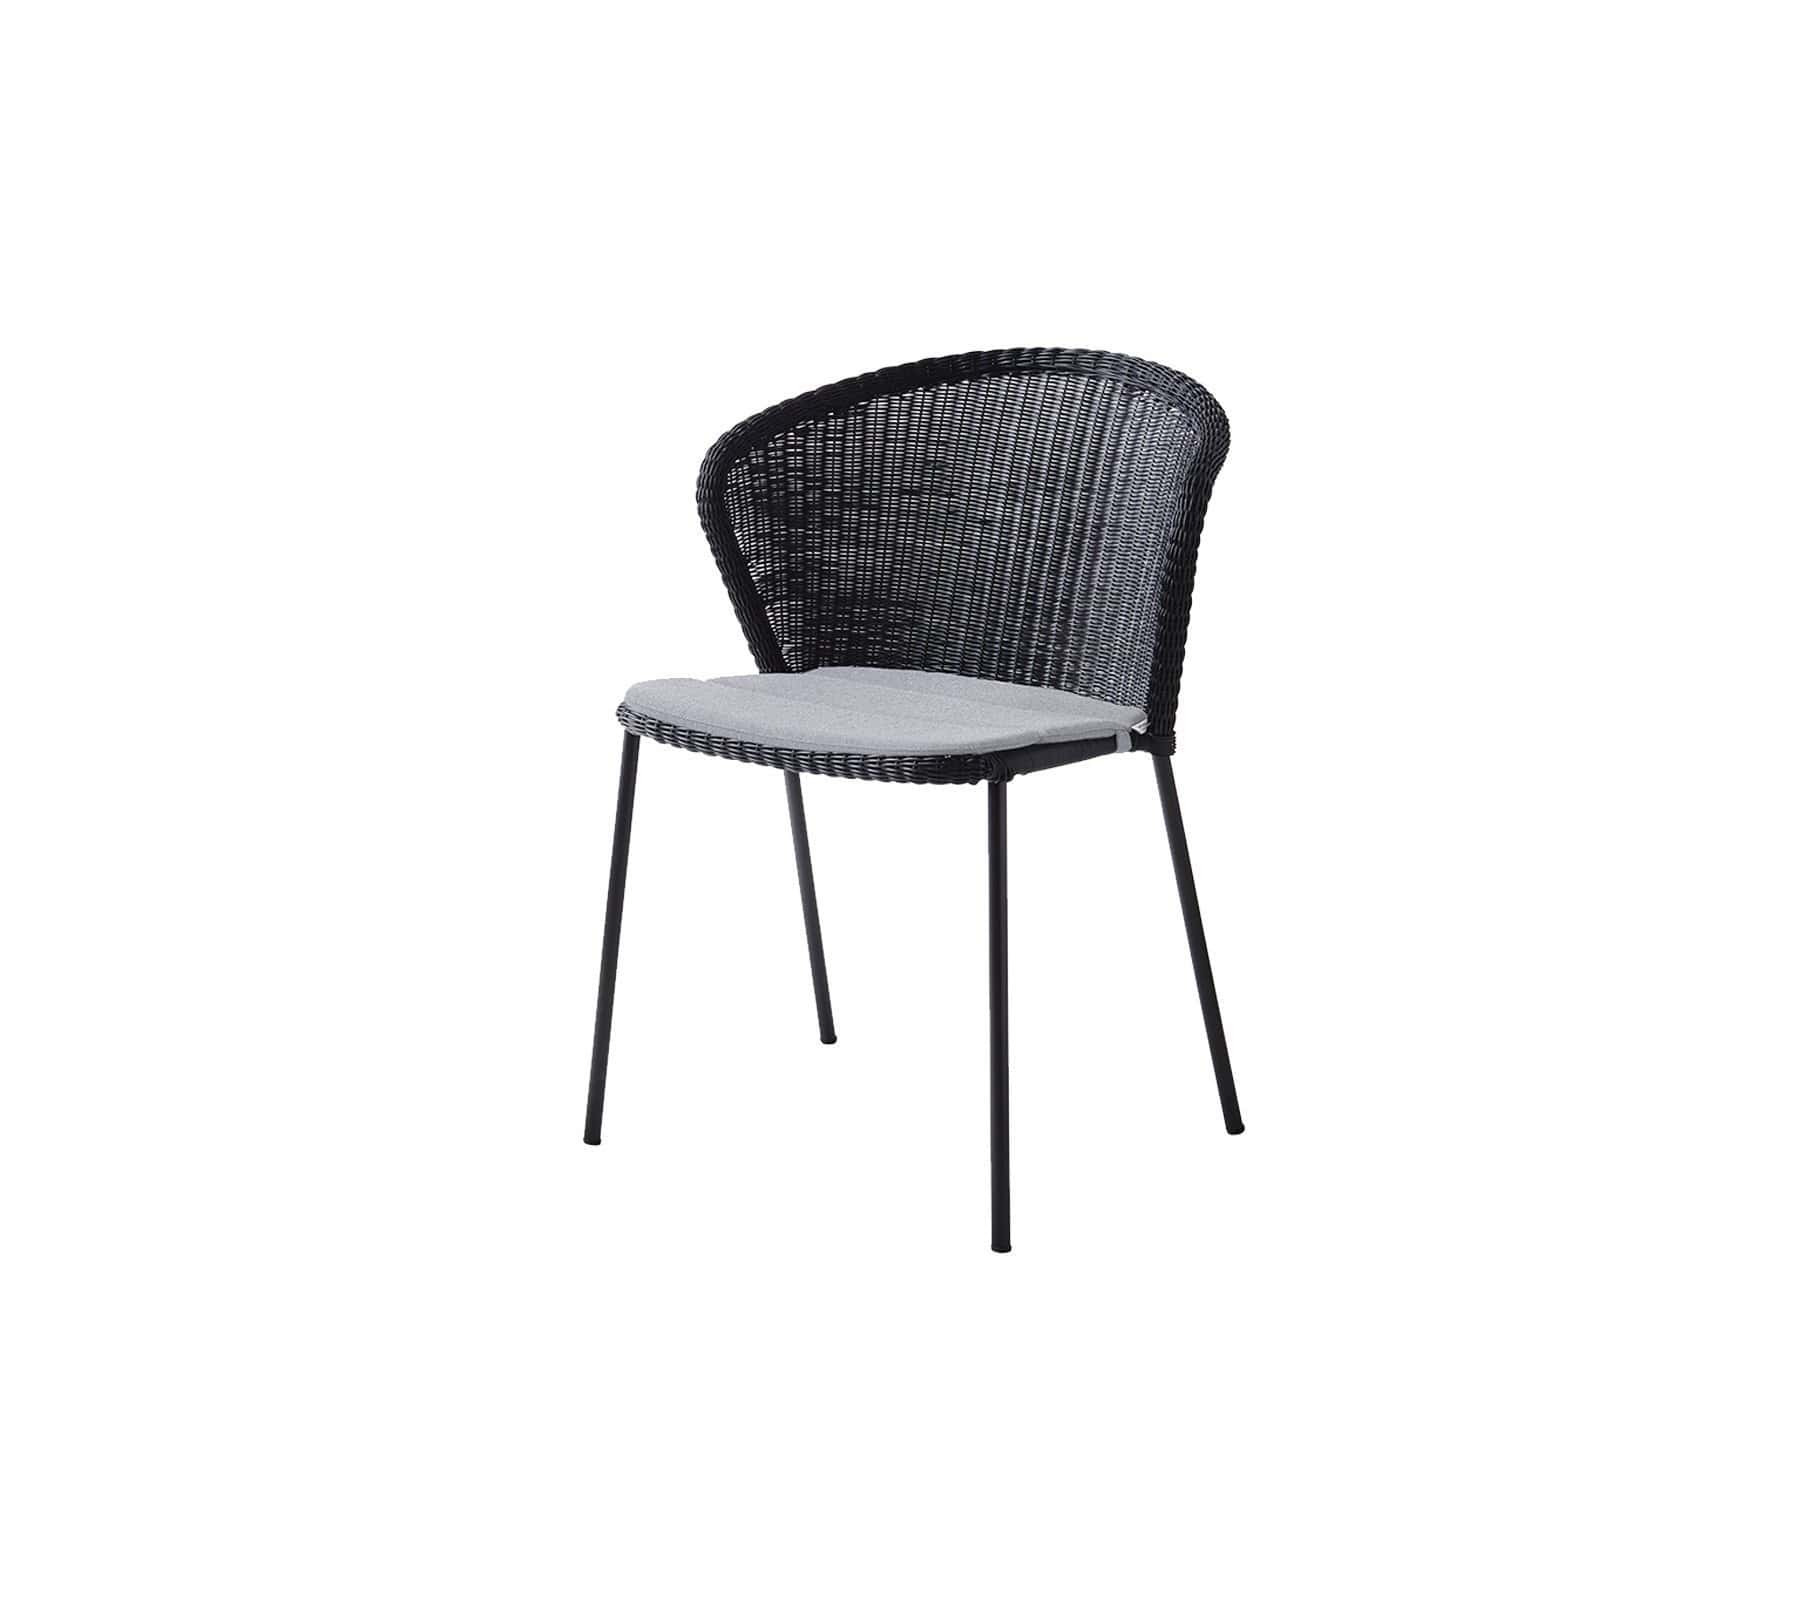 Cane-Line Denmark Outdoor Chairs Black / Grey Cane-Line Lean chair, stackable